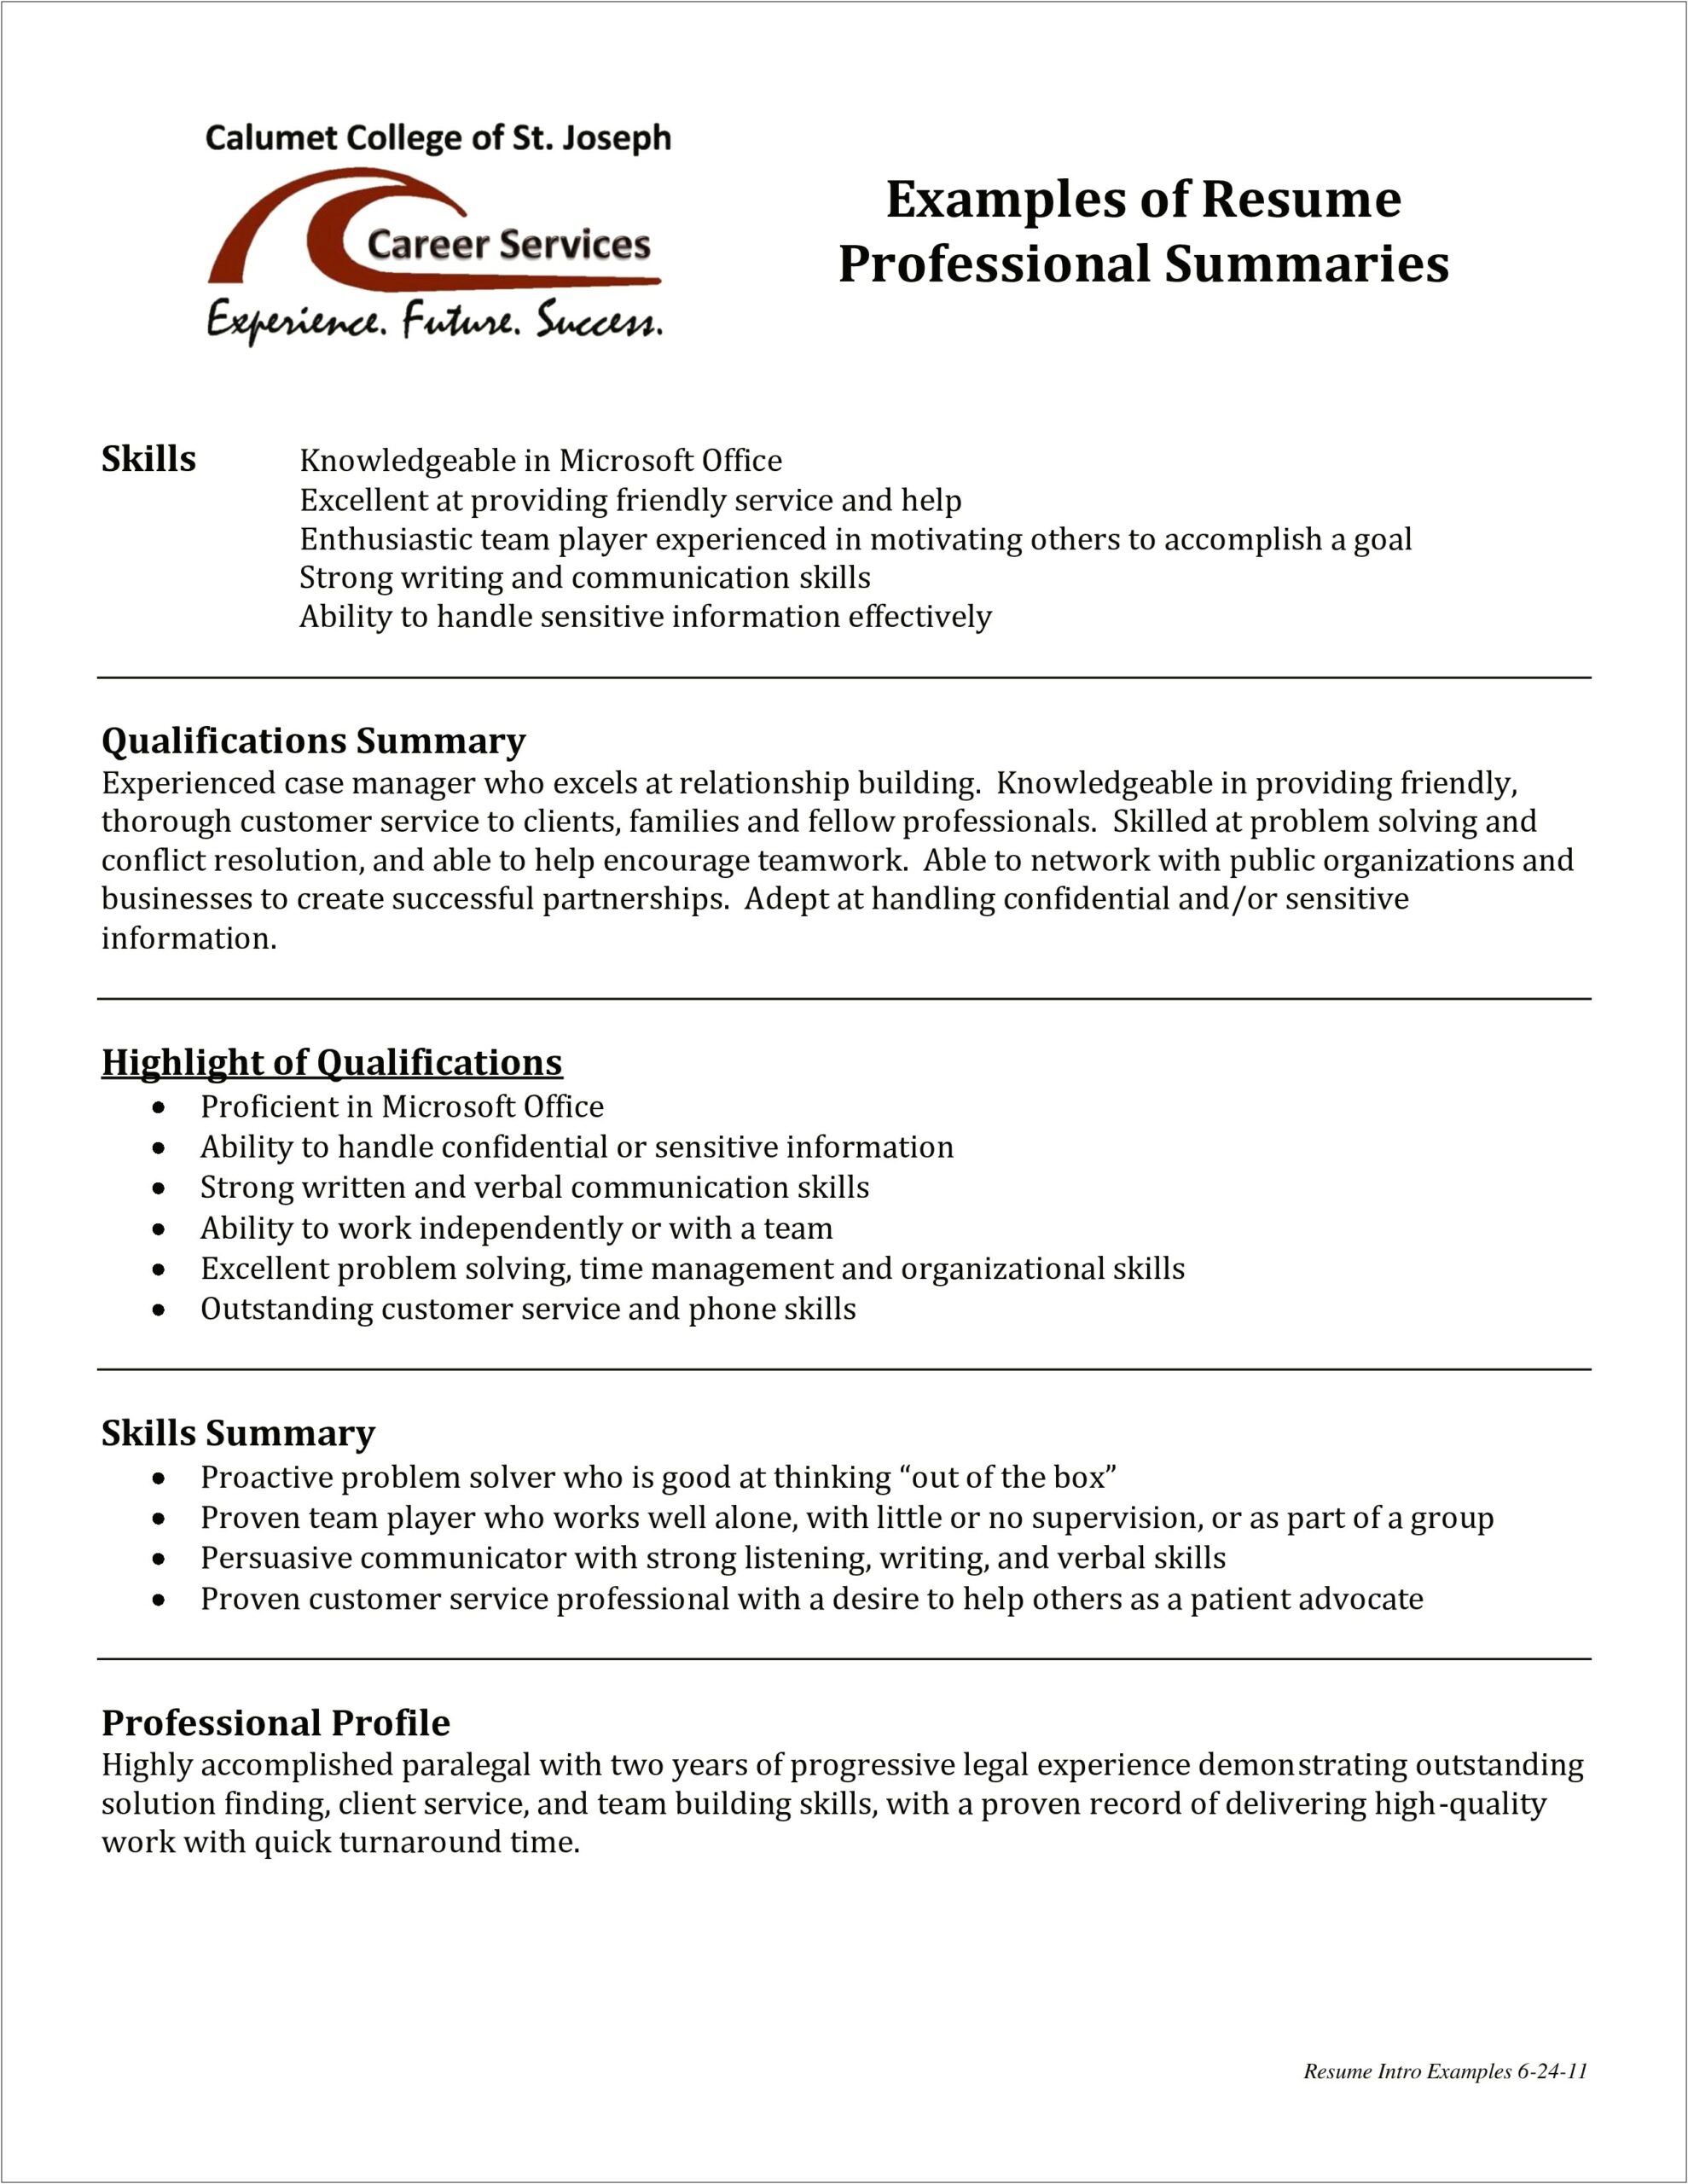 Typing Up A Summary For A Resume